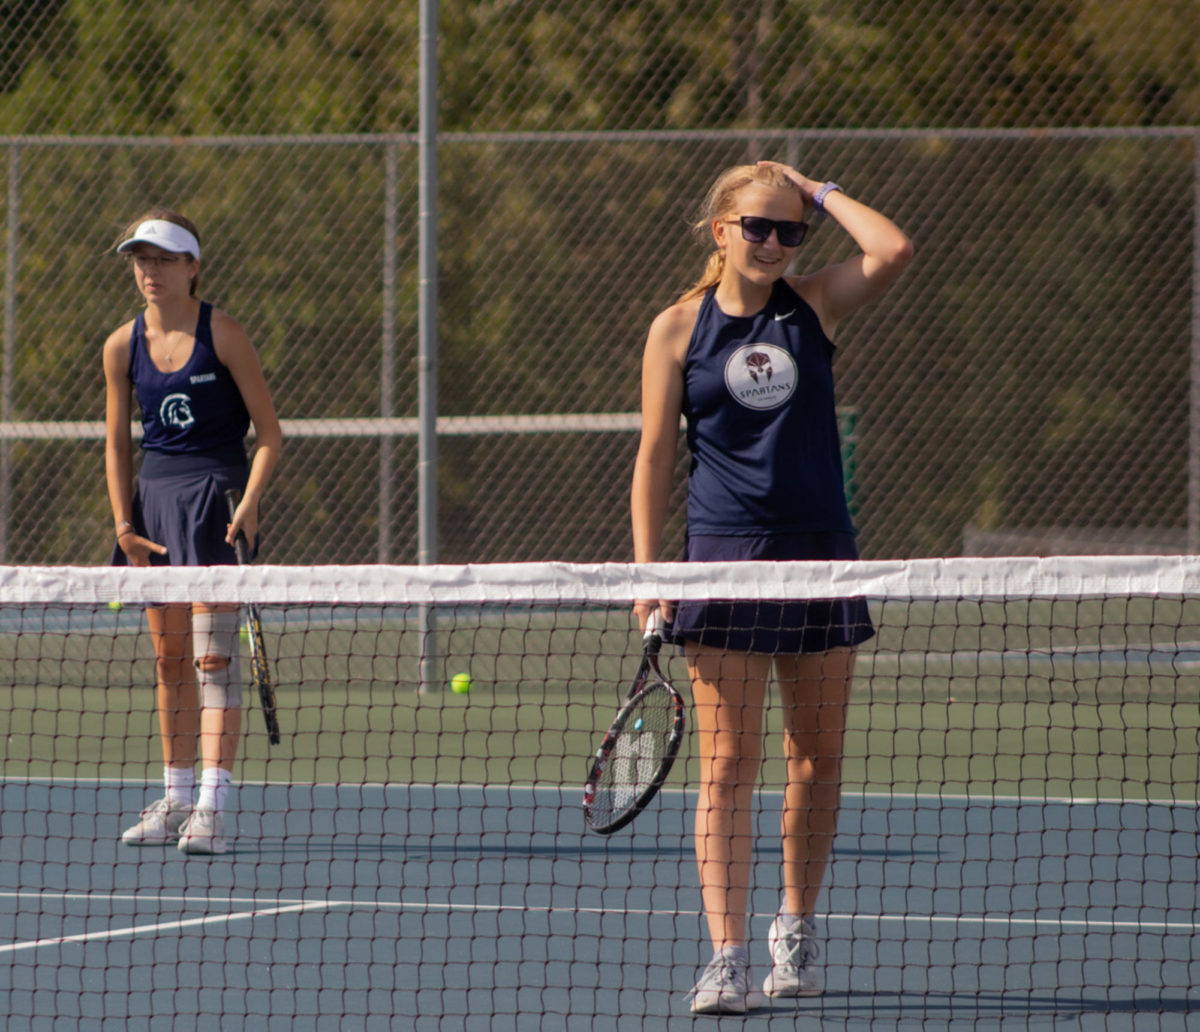 Sophie Rosser and Rachel Latzel shake off a bad point in their match against Timberland High School. The duo pushed through and won their match 6-4 on Sept. 12.